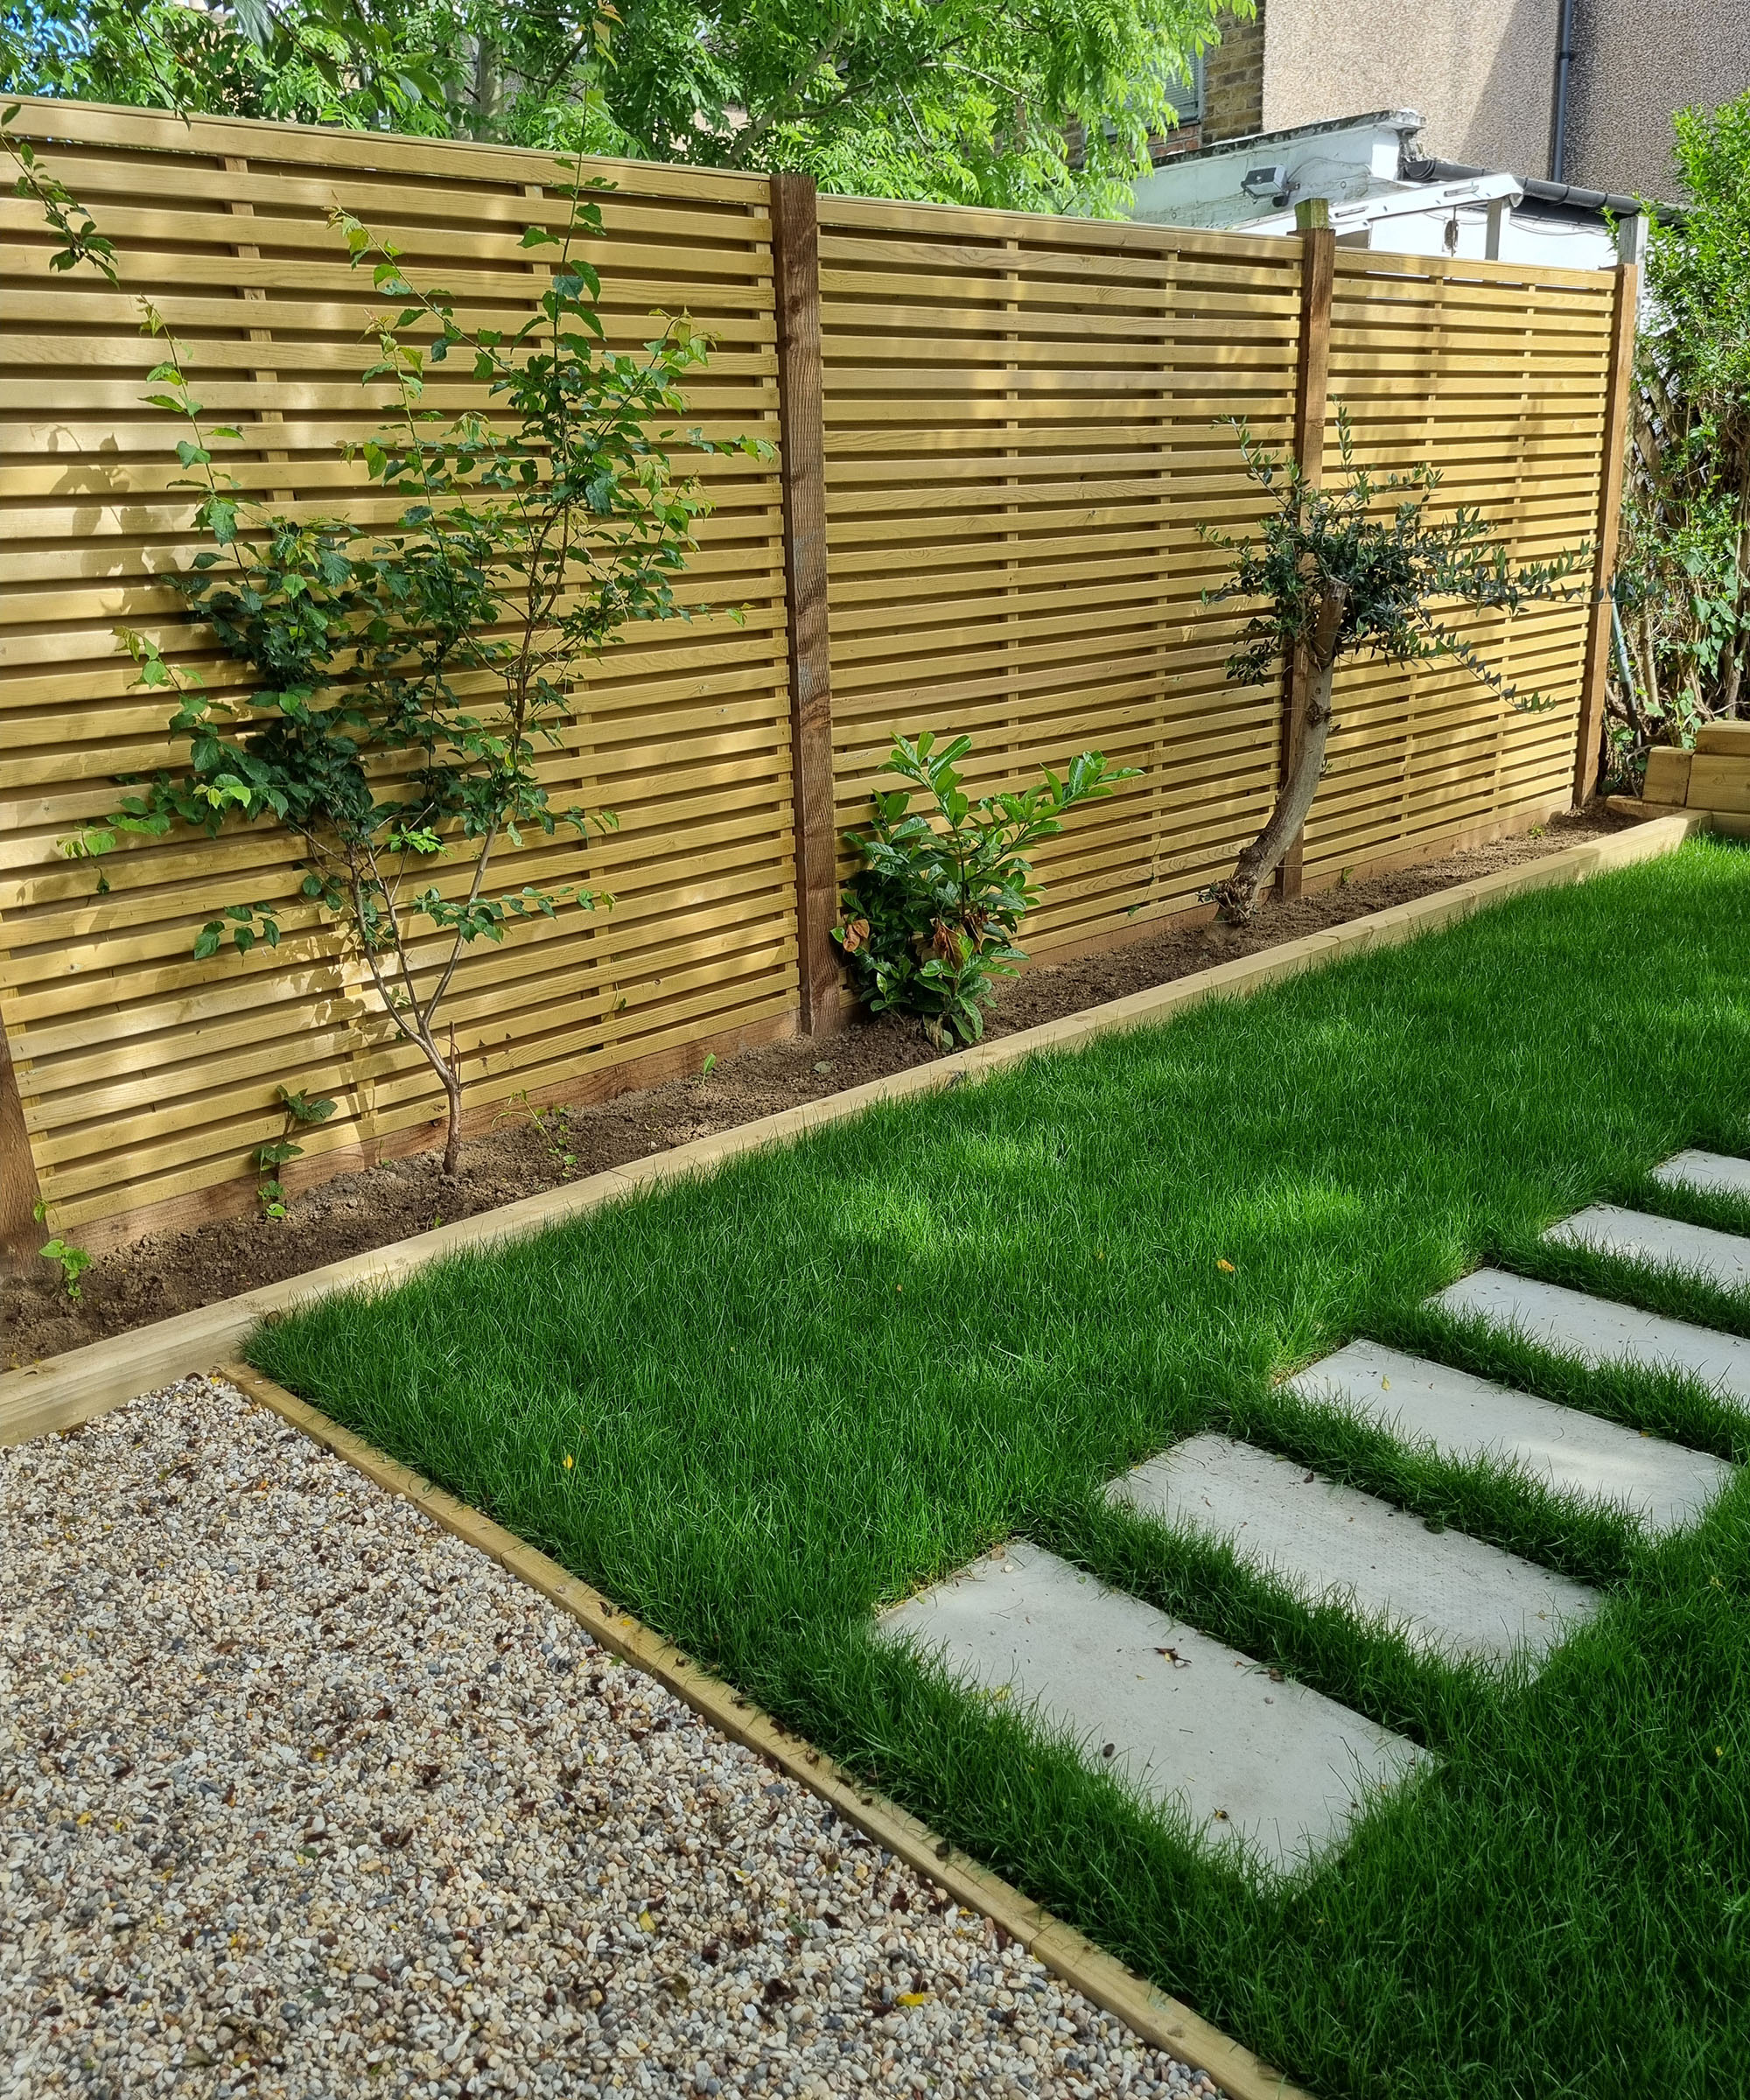 A horizontal slatted fence with a narrow garden bed with evergreen planting and a fresh lawn